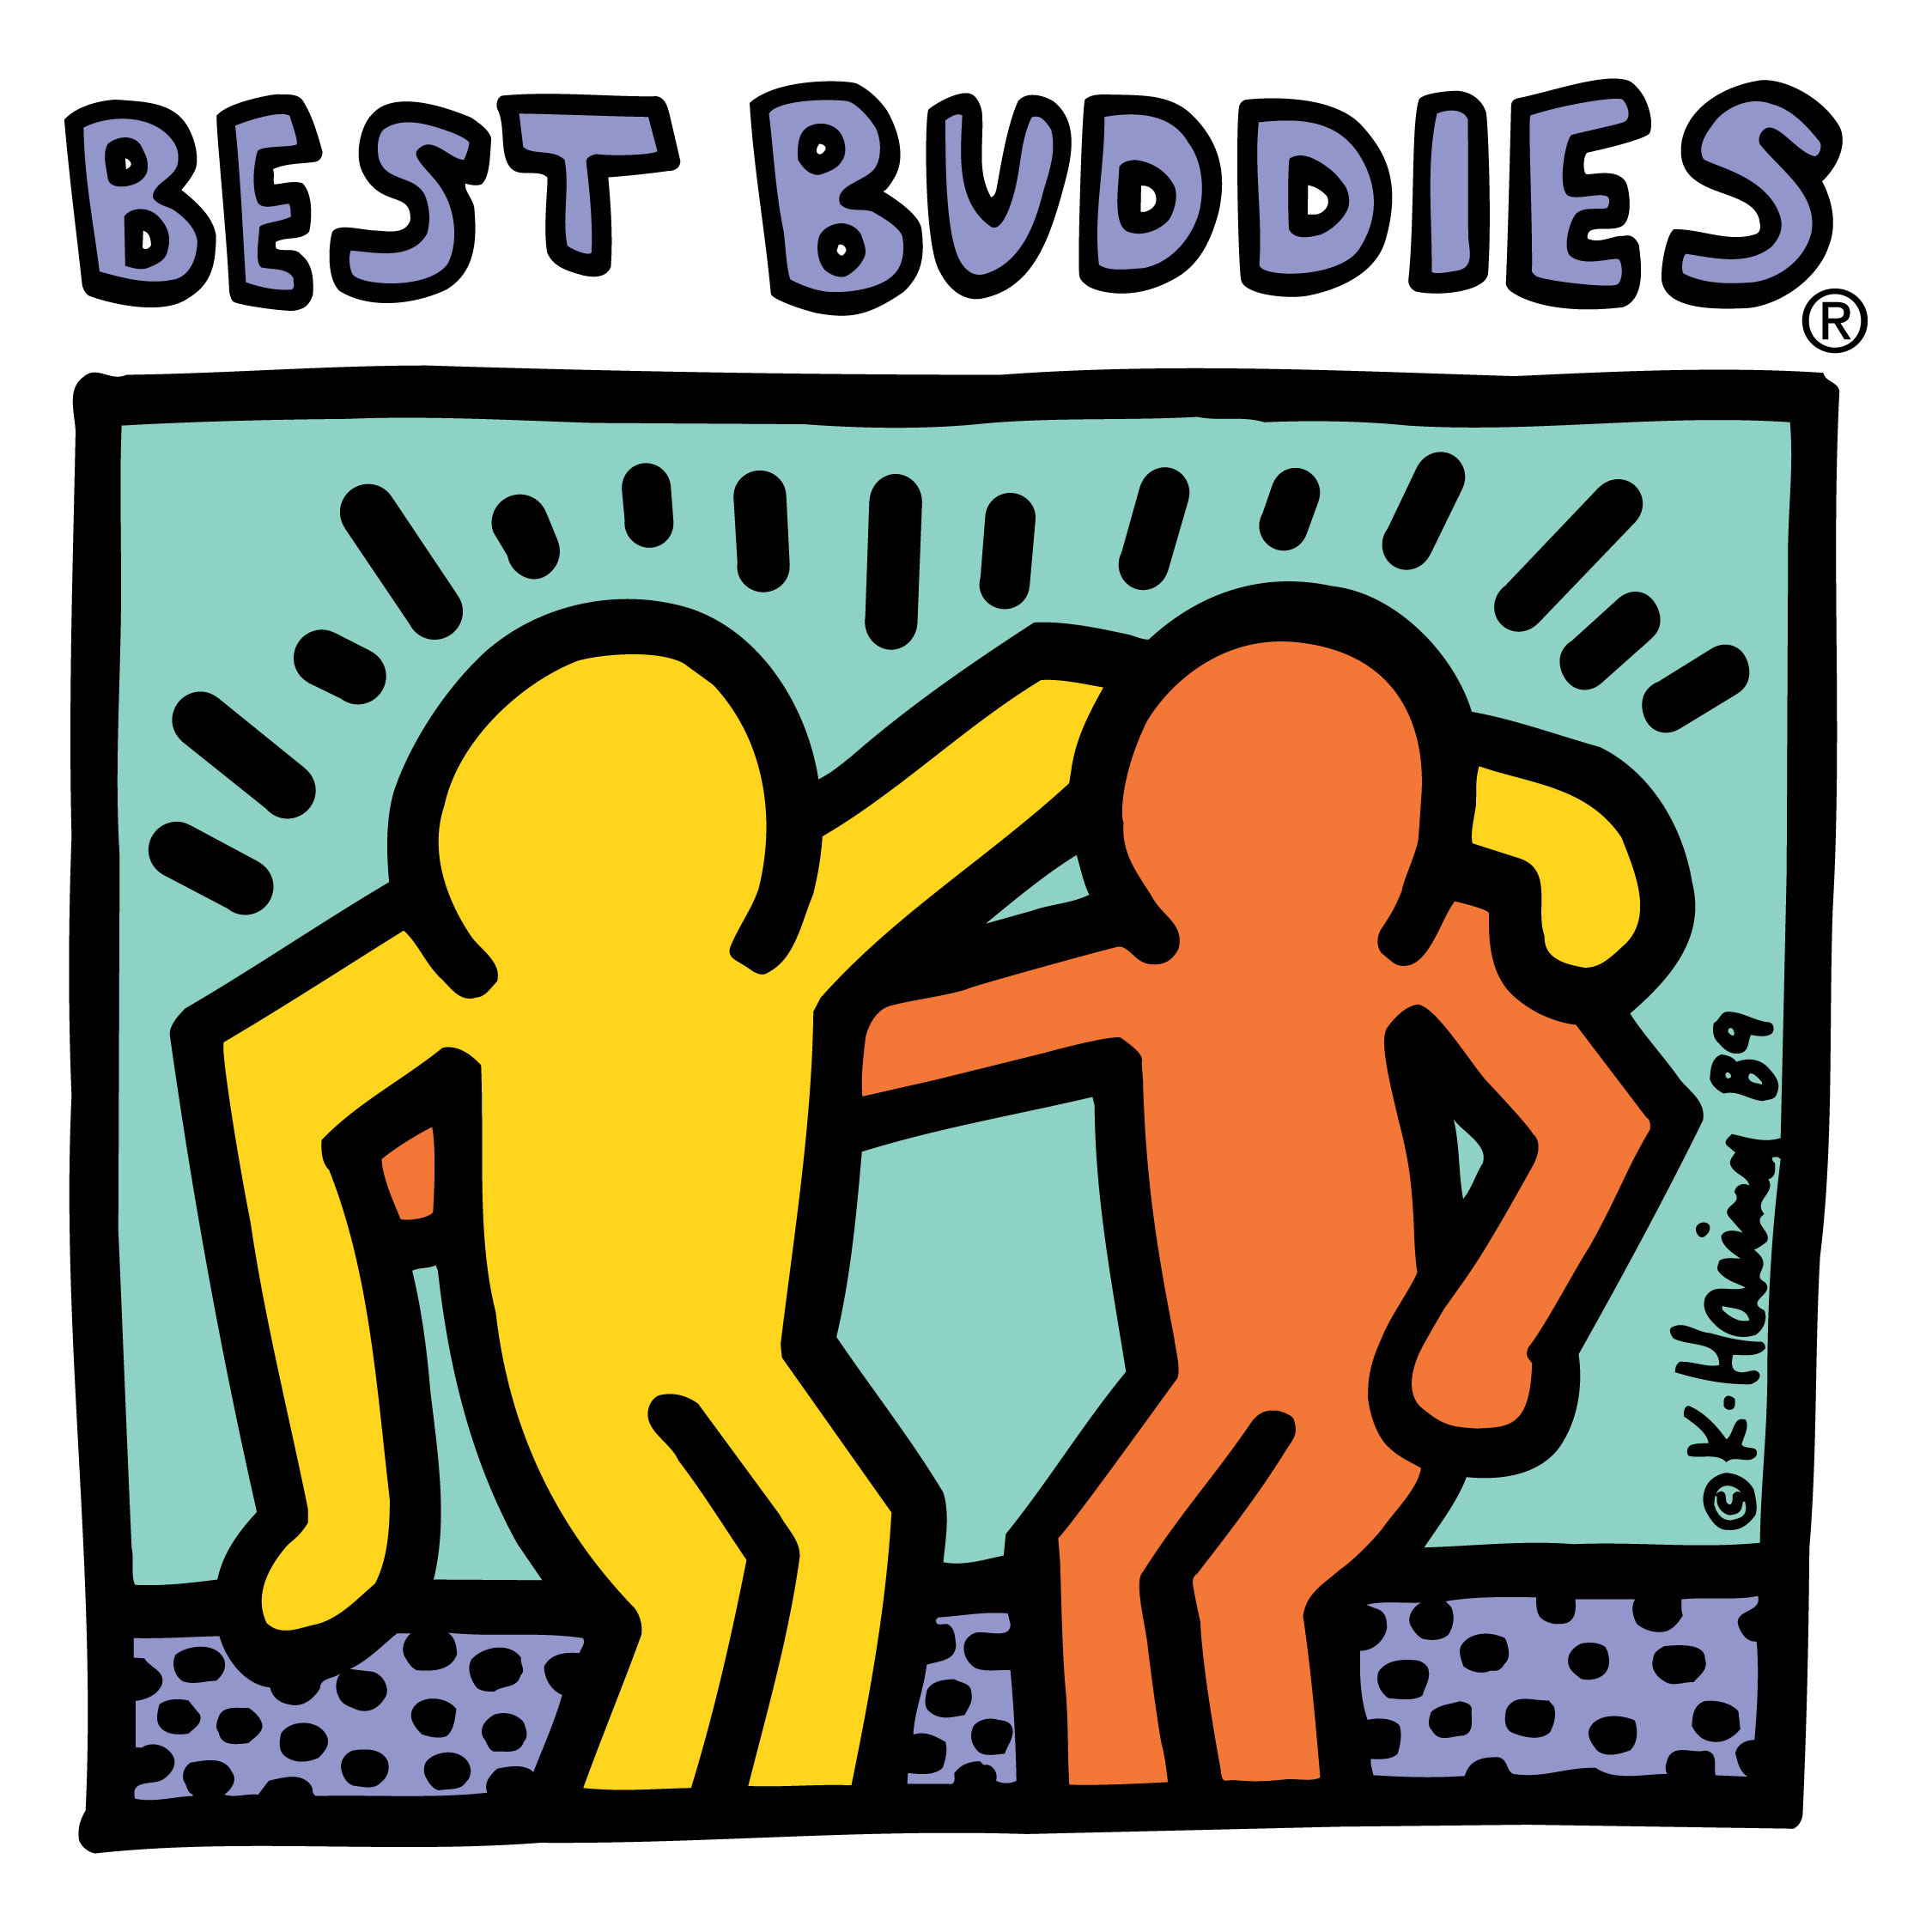 Two+individuals+appear+to+be+hanging+out+and+bonding+in+the+logo+of+the+Best+Buddies+organization.+The+logo+was+created+by+Keith+Haring+and+is+meant+to+symbolize+one-to-one+friendship%2C+affection+and+acceptance.+